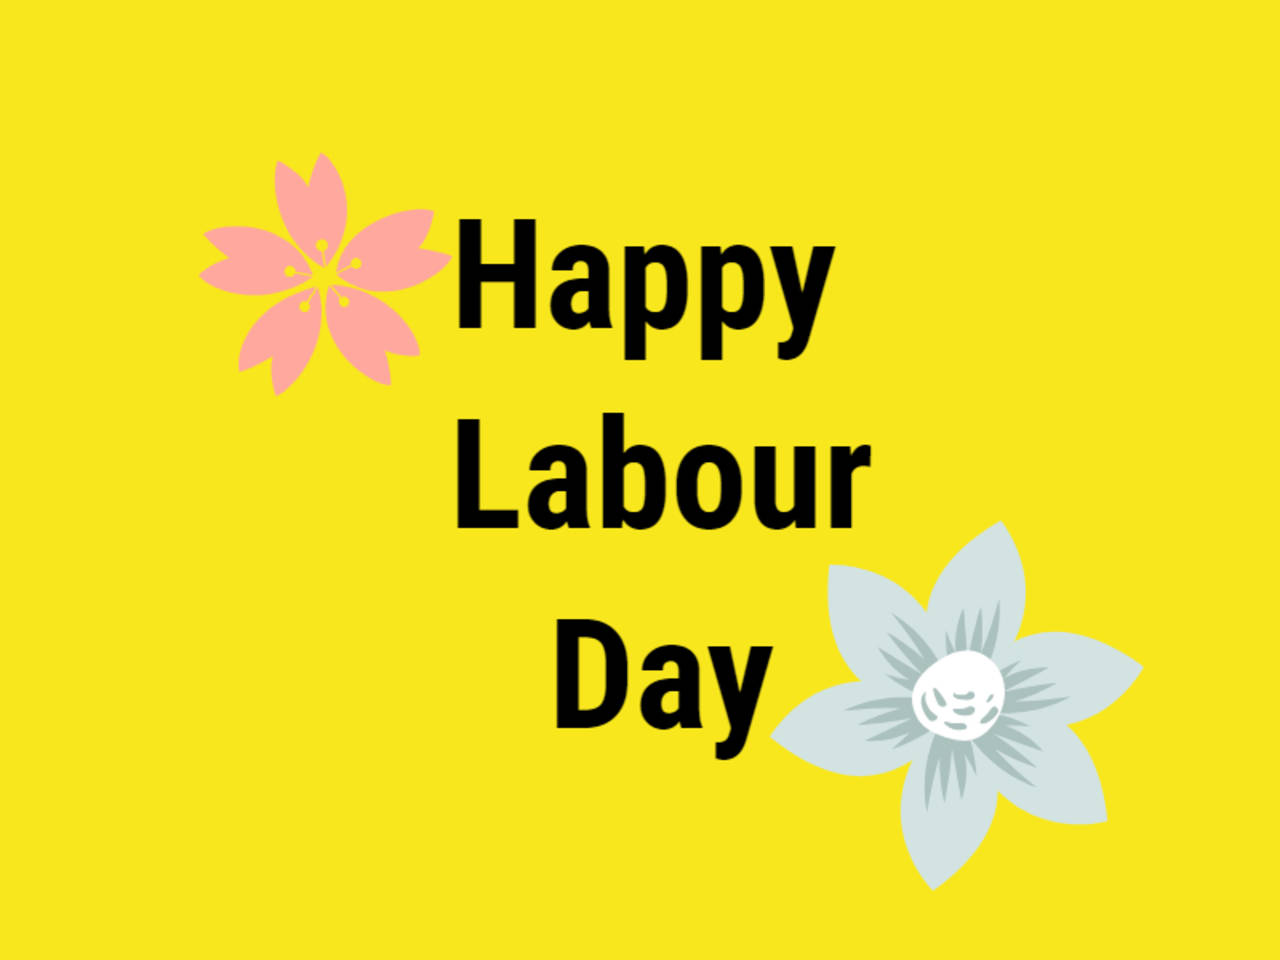 Labour day 2018: Wishes, Quotes, History & Images - Times of India